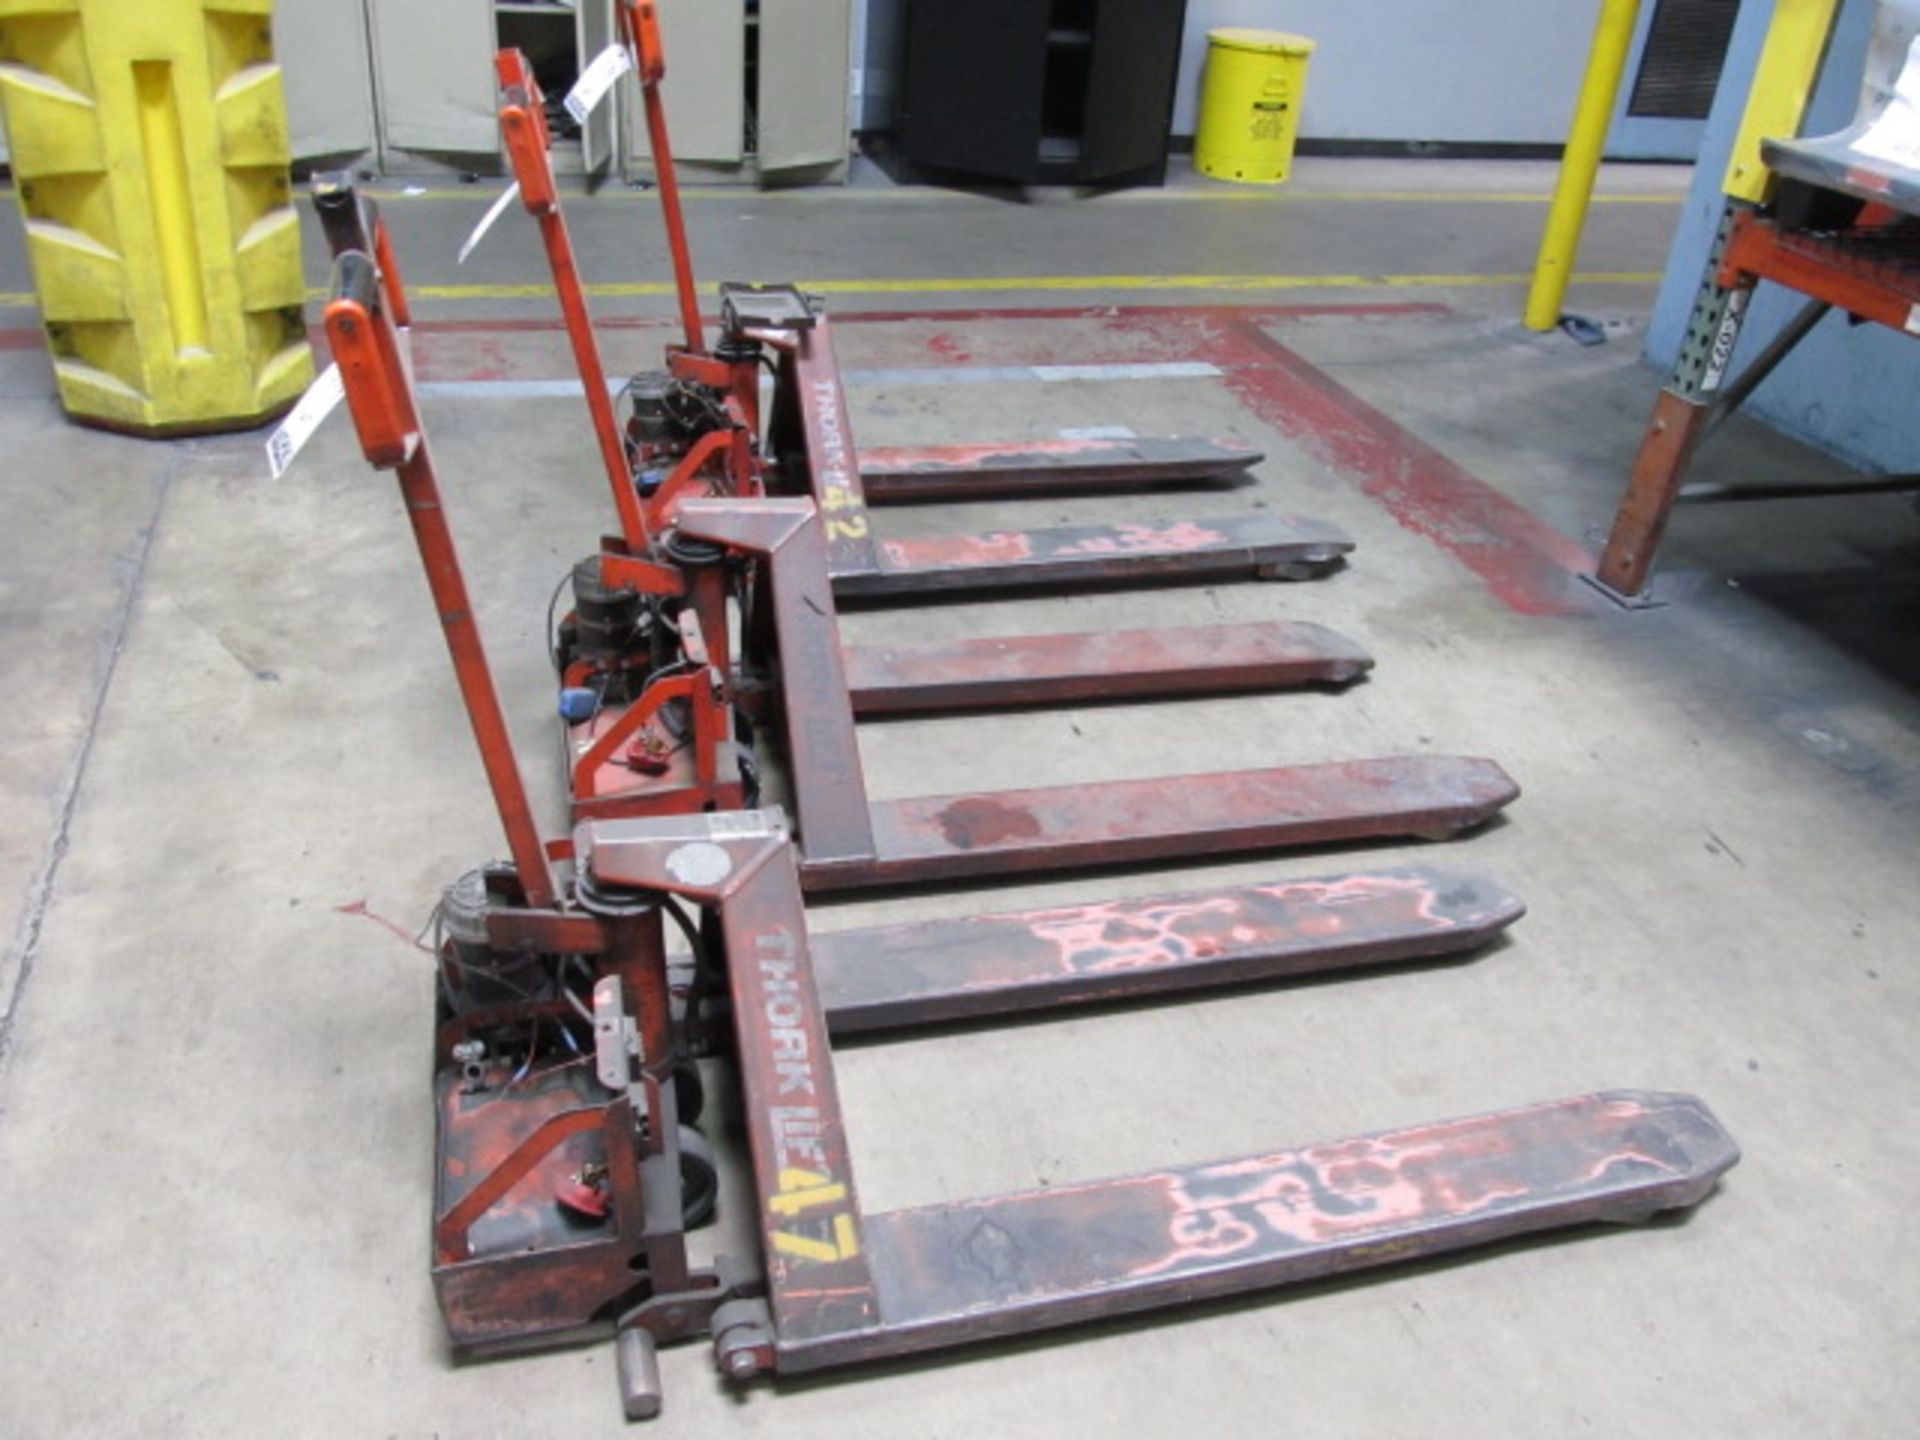 Lot (3) Interthor Thork Lift Electric Hydraulic 2200lb Capacity Pallet Jack For Parts, No Batteries,